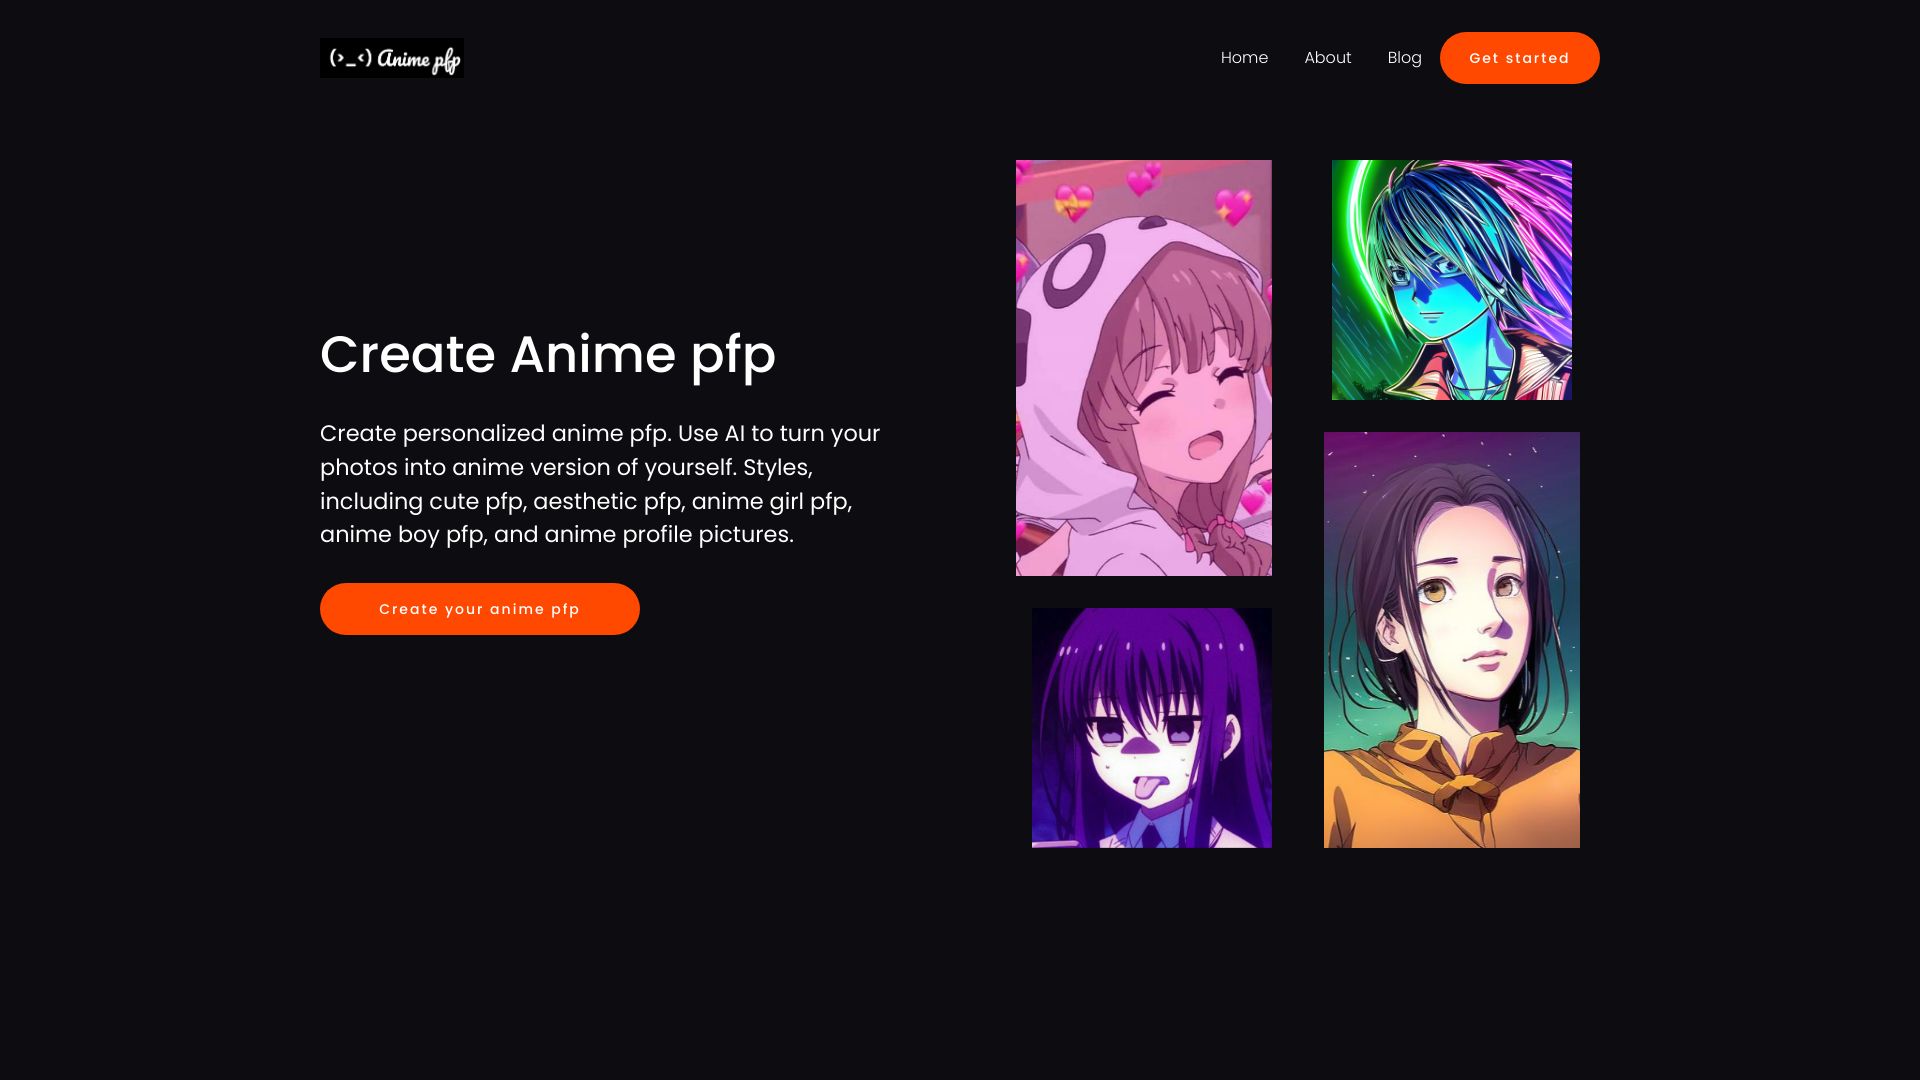 Emo Anime Girl Pfp - Top 20 Emo Anime Girl Profile Pictures, Pfp, Avatar,  Dp, icon [ HQ ]